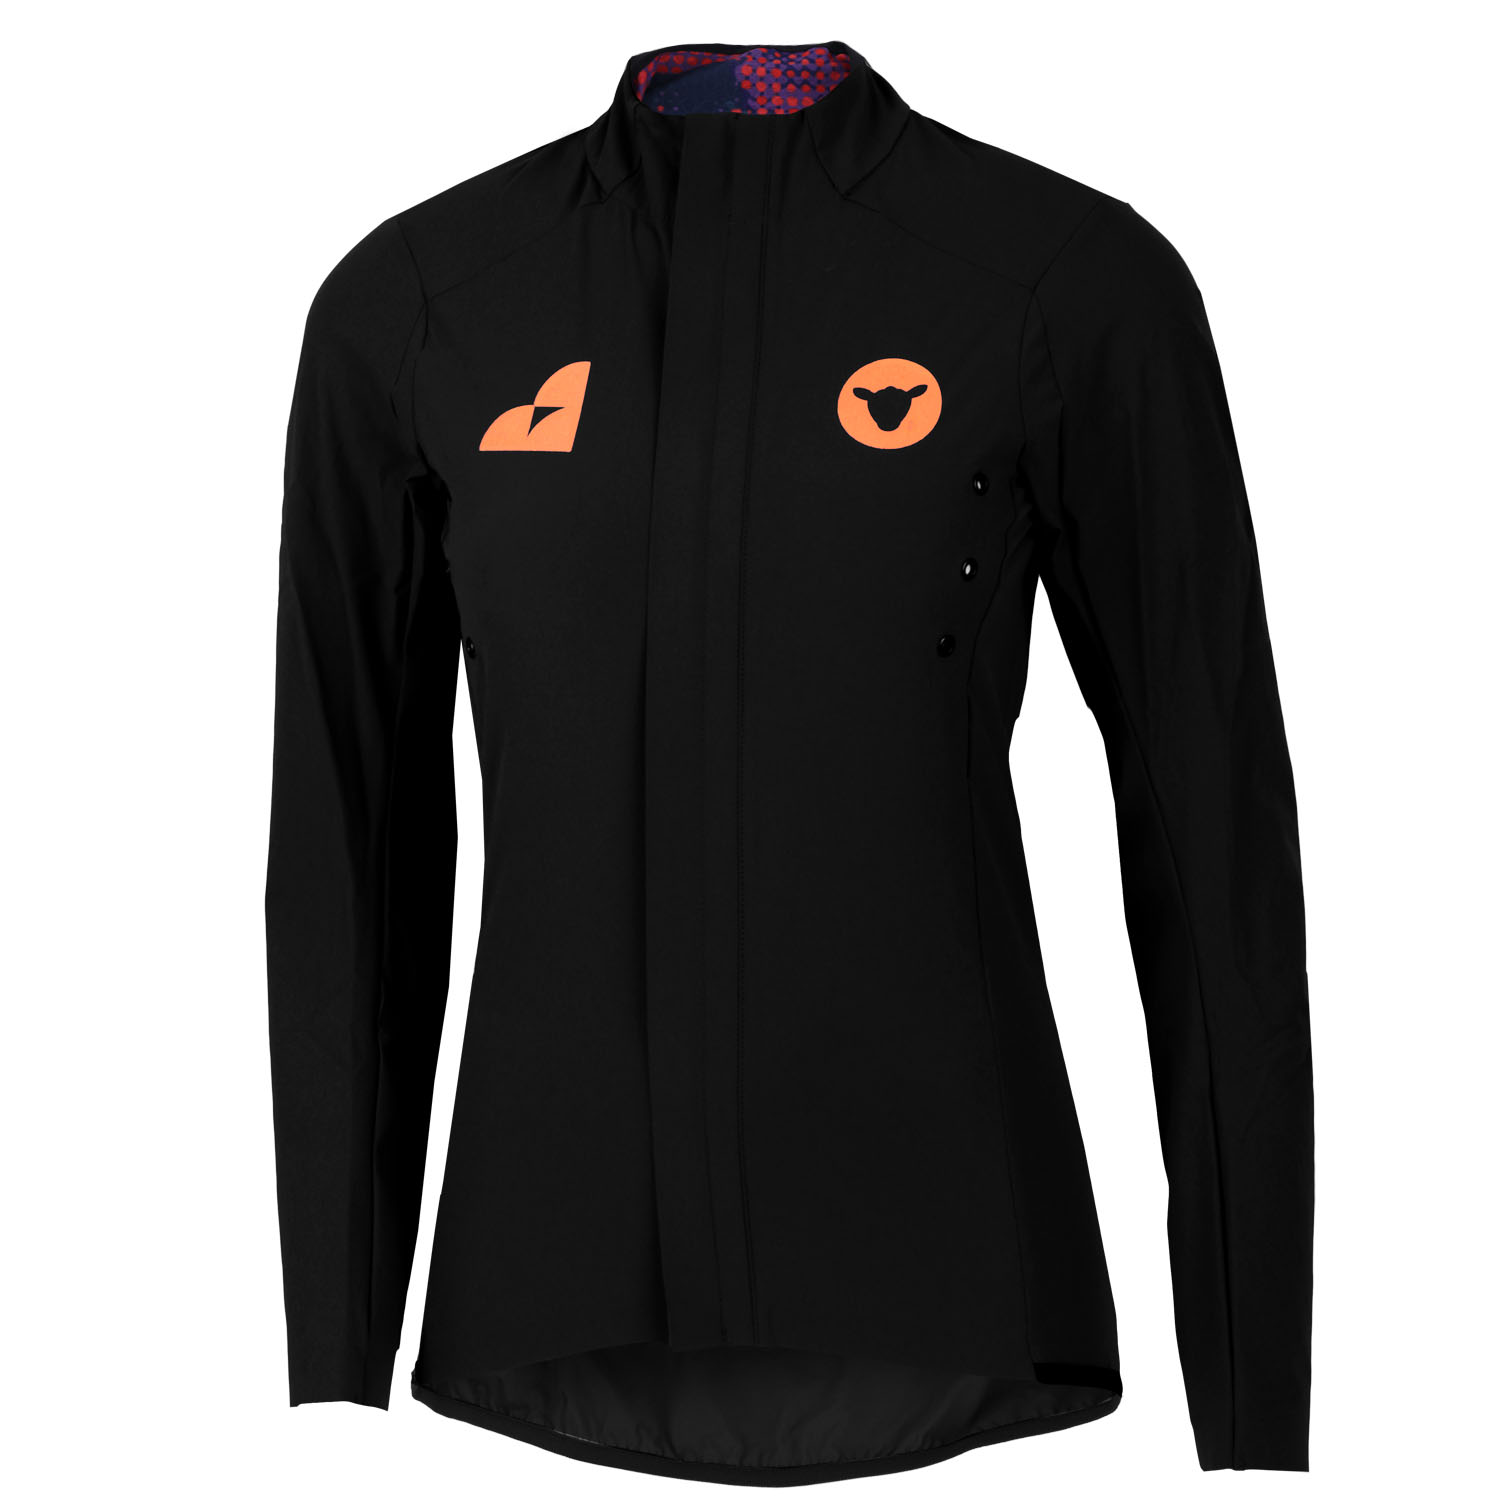 Picture of Black Sheep Cycling LTD Queens Micro Jacket Women - Spain